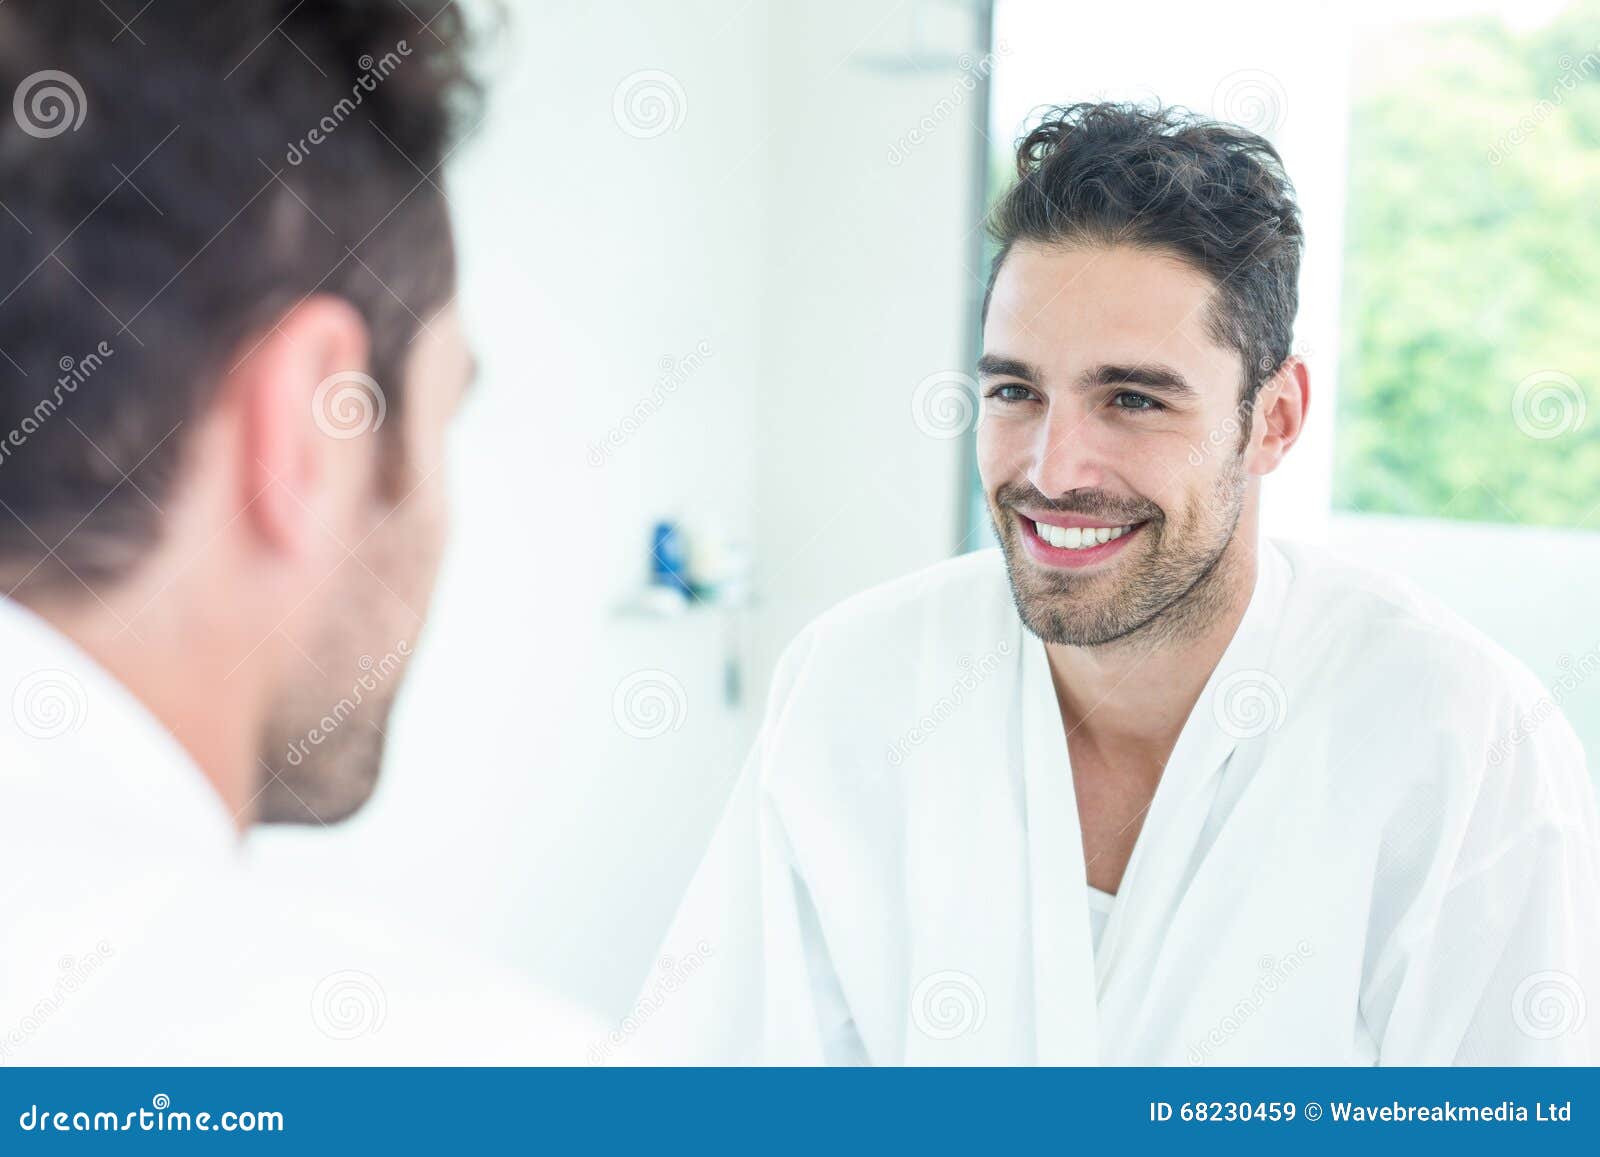 Handsome Man Looking In Mirror Stock Photo - Image: 68230459
